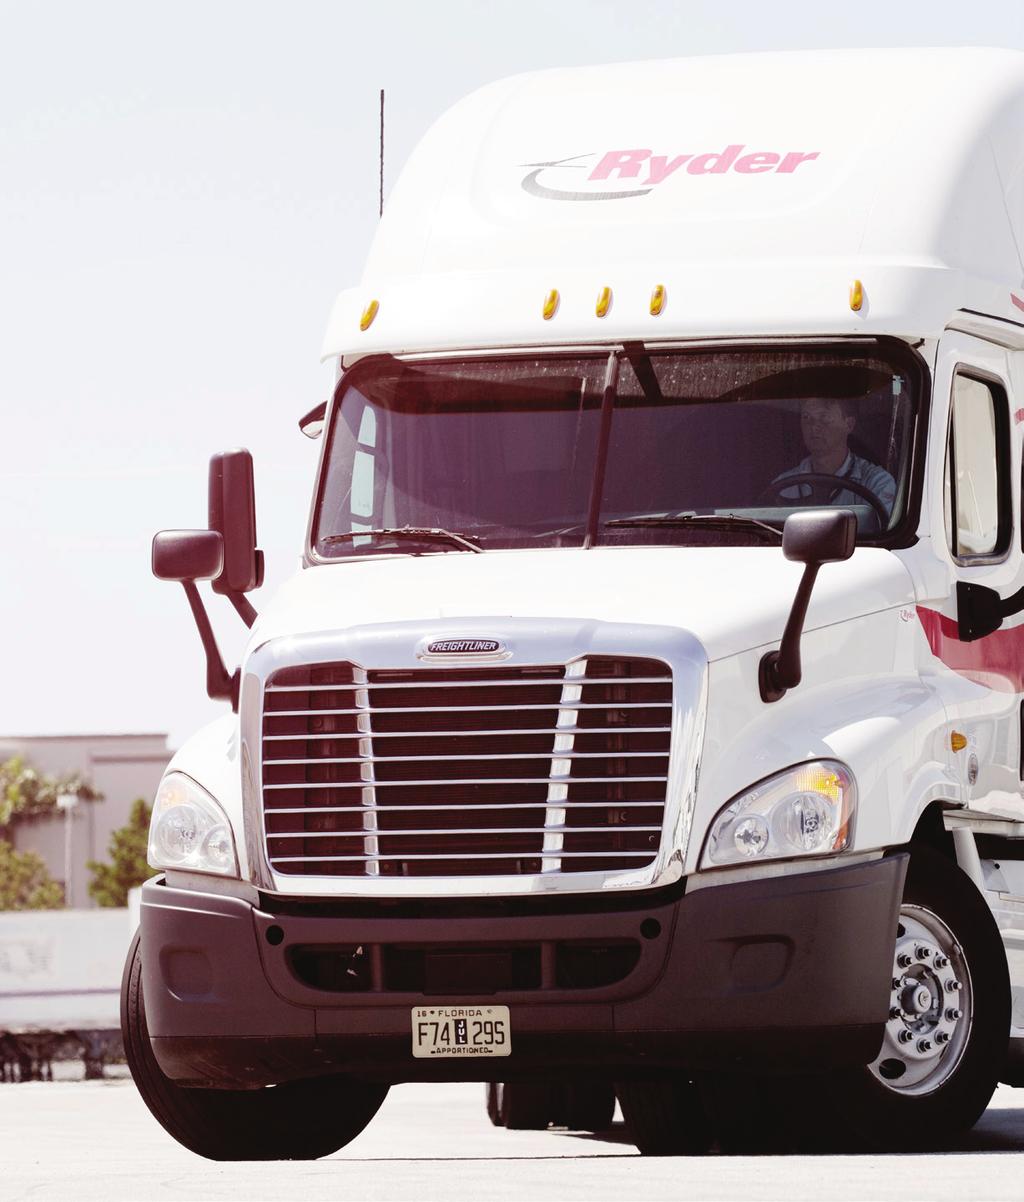 Benefits of Your Ryder ChoiceLease Get Out of the Trucking Business and Back to Your Business We take the hassle out of managing your fleet so you have time to focus on your products and customers.